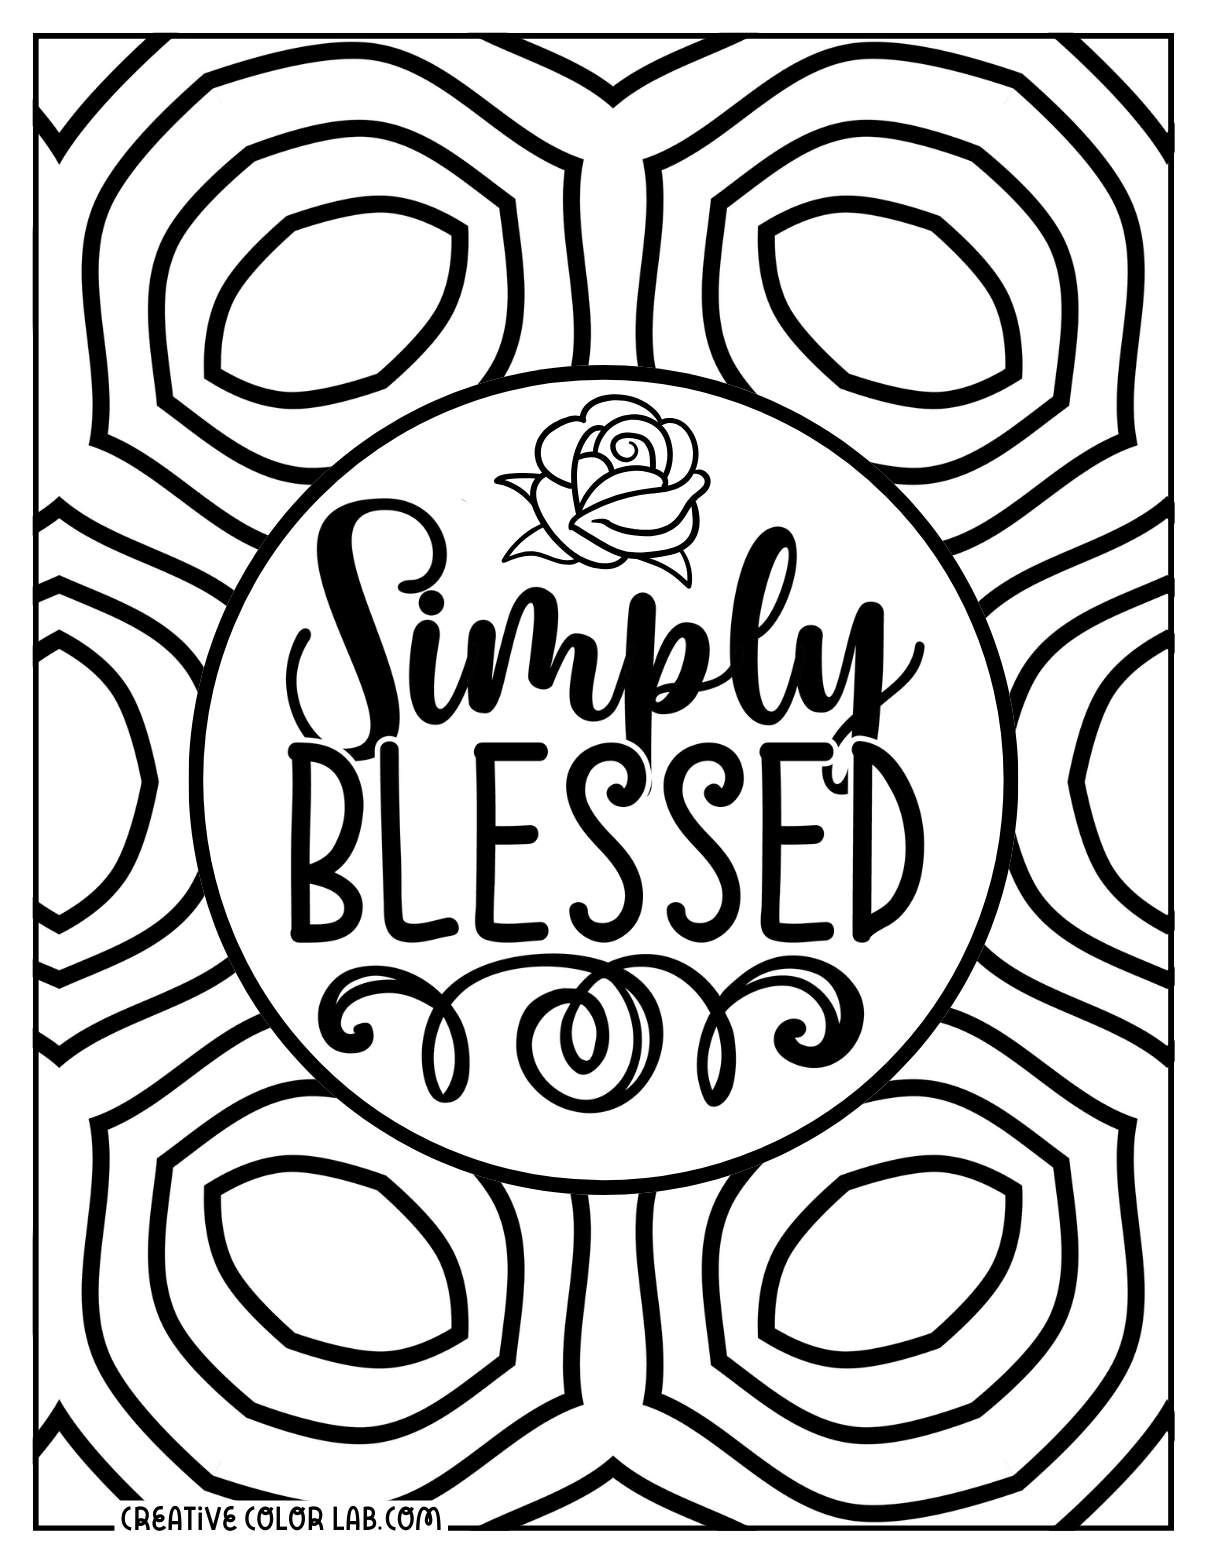 Simple blessed biblical quote coloring page.